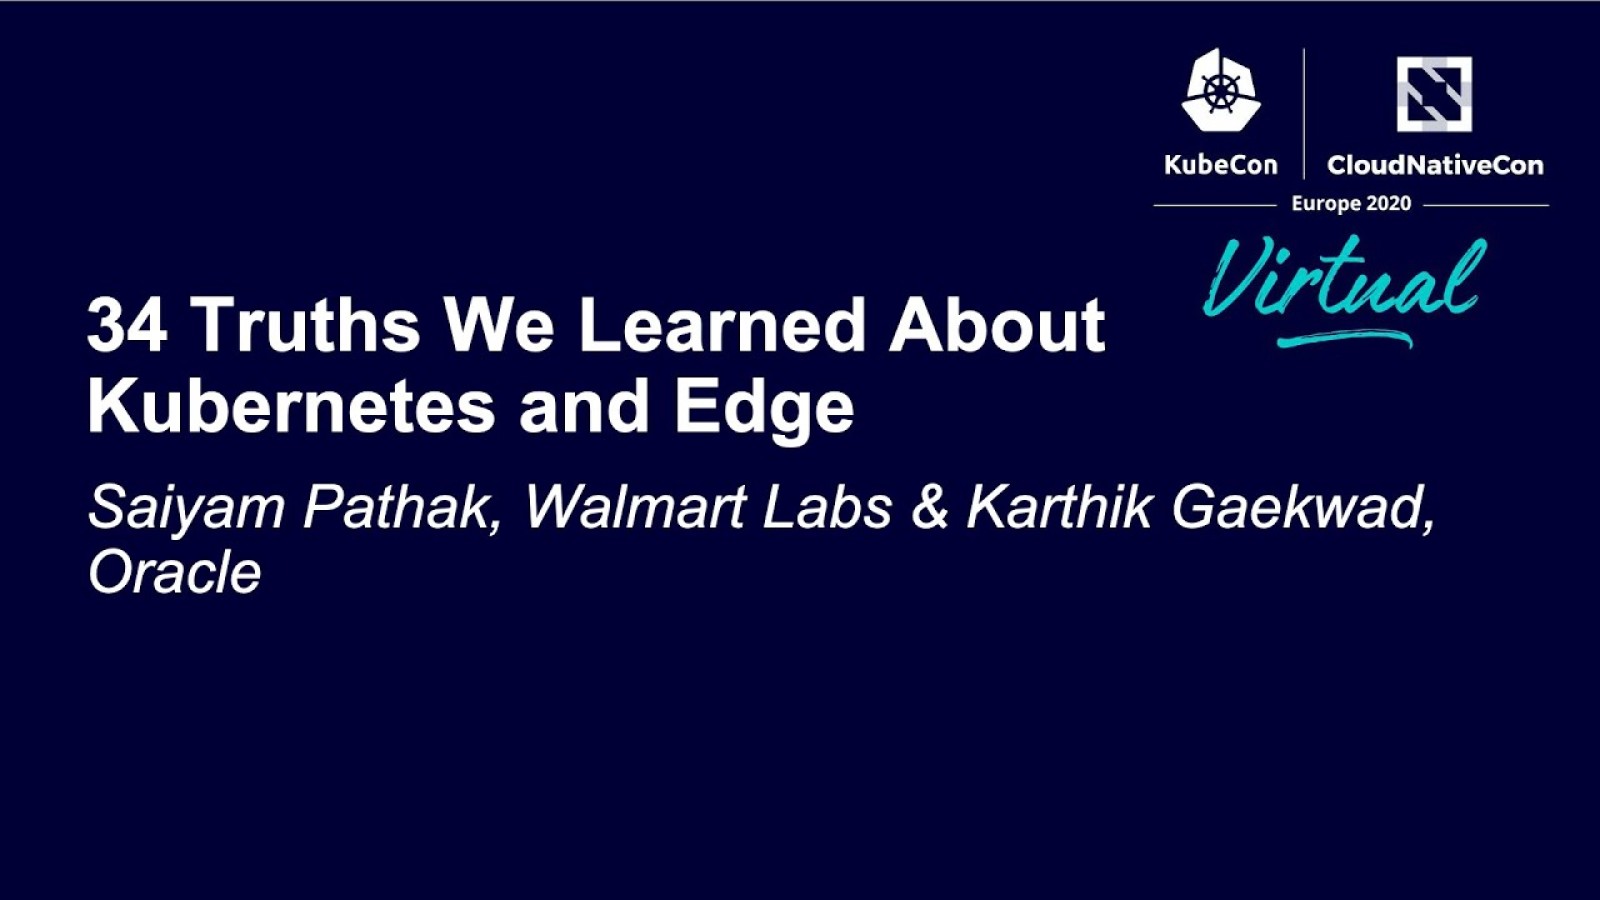 34 Truths We Learned About Kubernetes and Edge